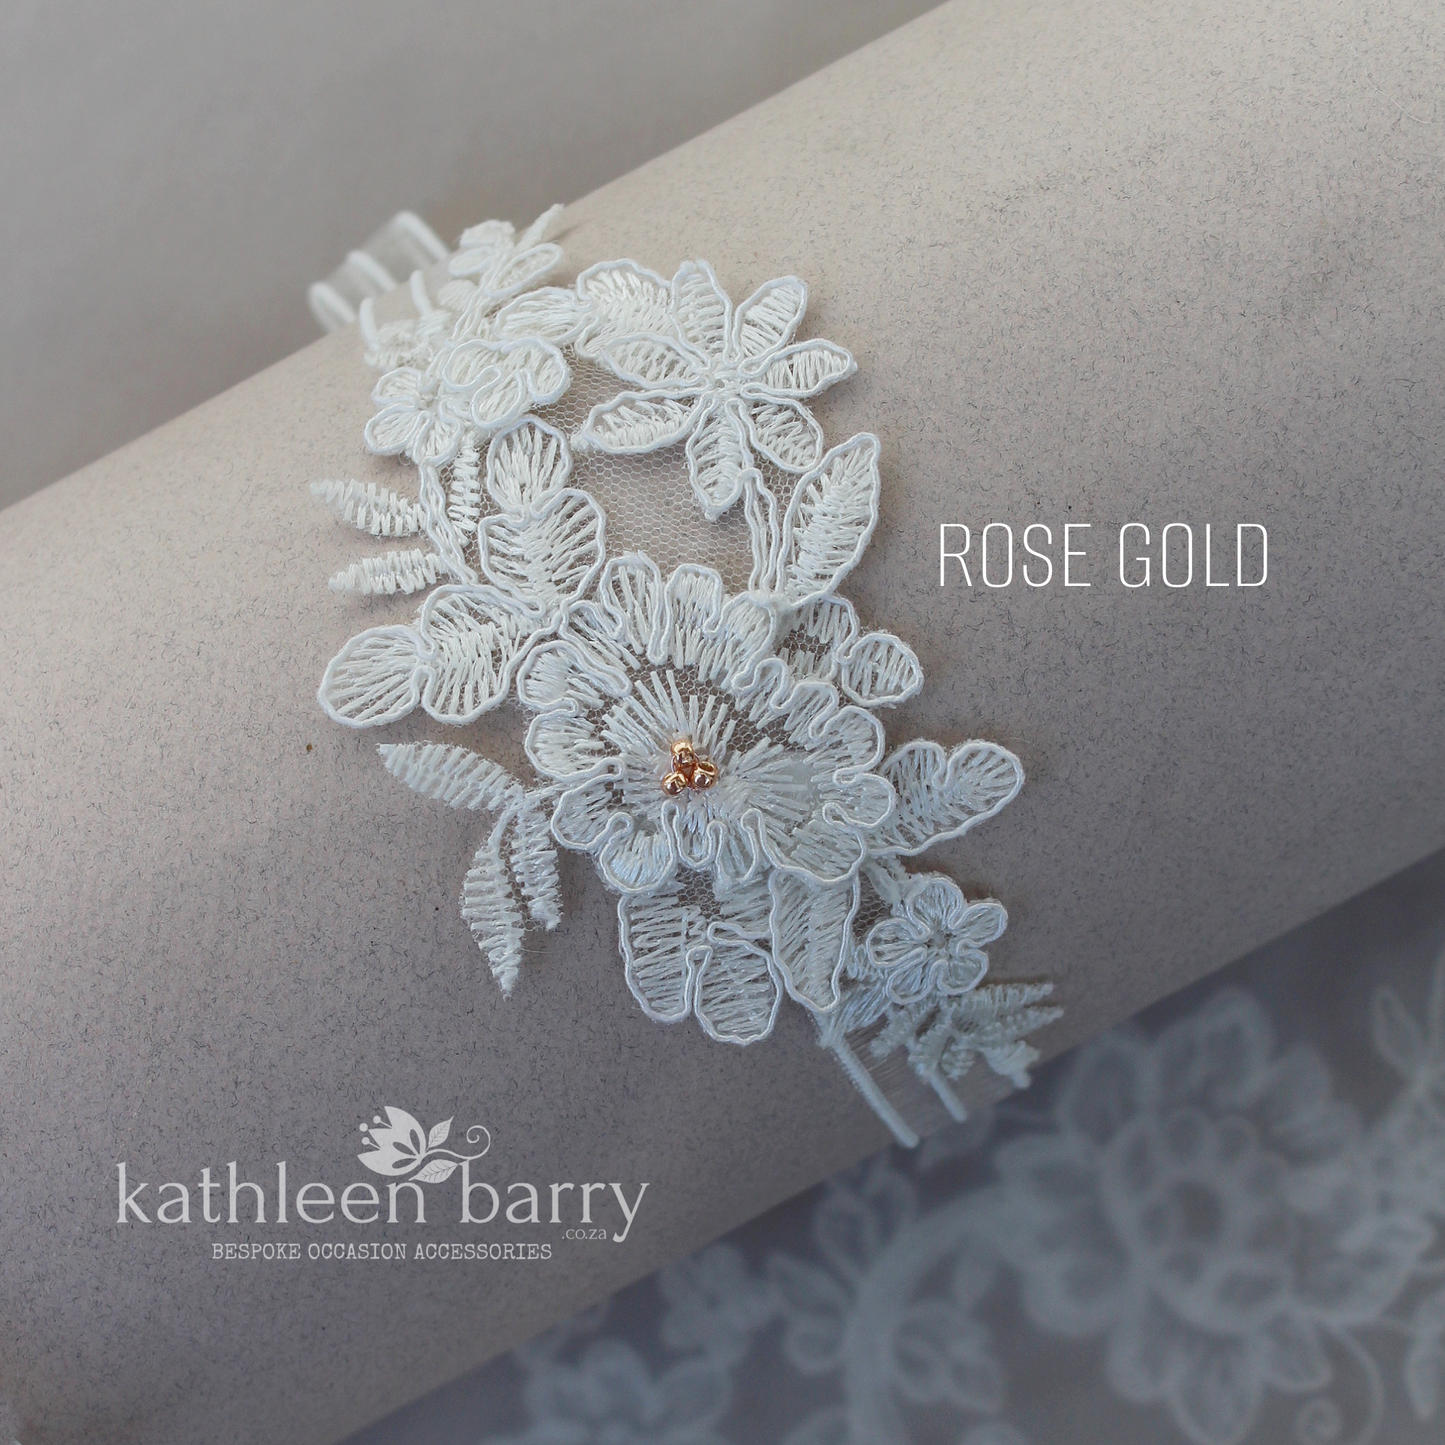 Shayna heirloom garter set (or individually) - pale ivory with Rose gold, gold or silver detail  - FROM: